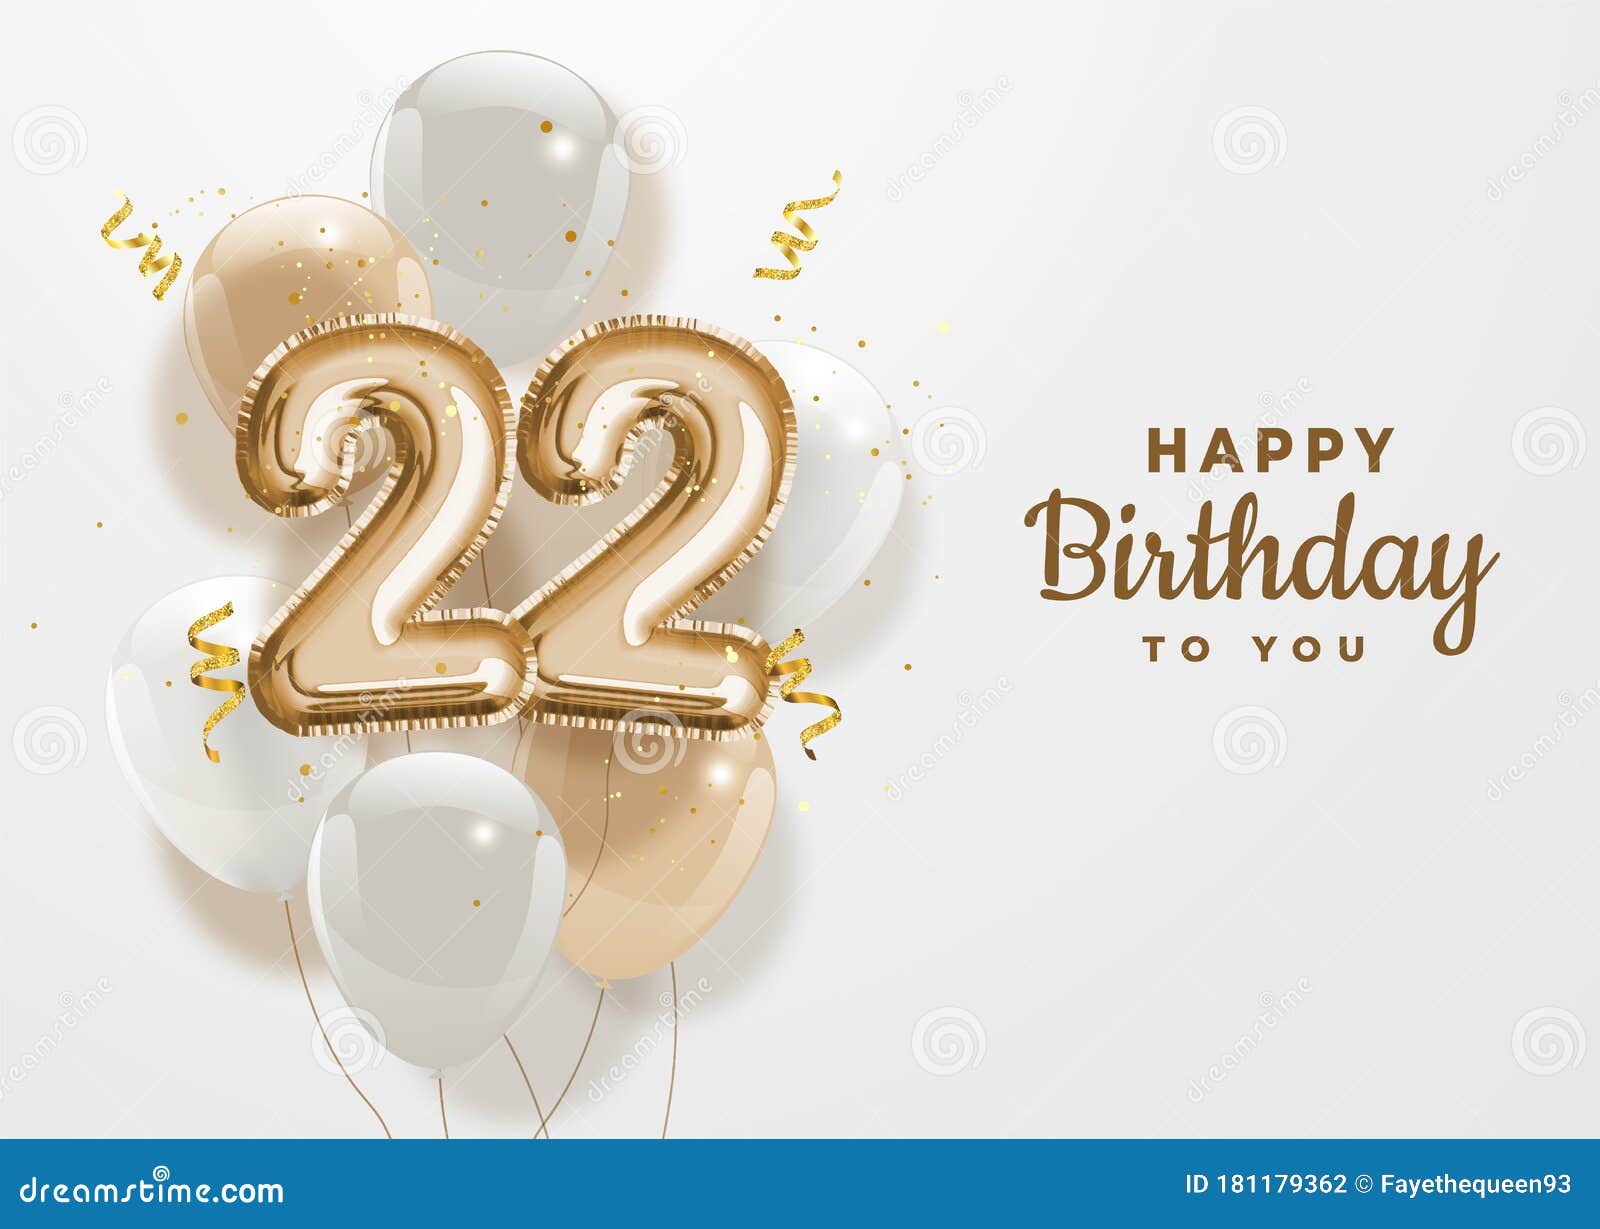 Happy 22th Birthday Gold Foil Balloon Greeting Background. Stock Vector ...